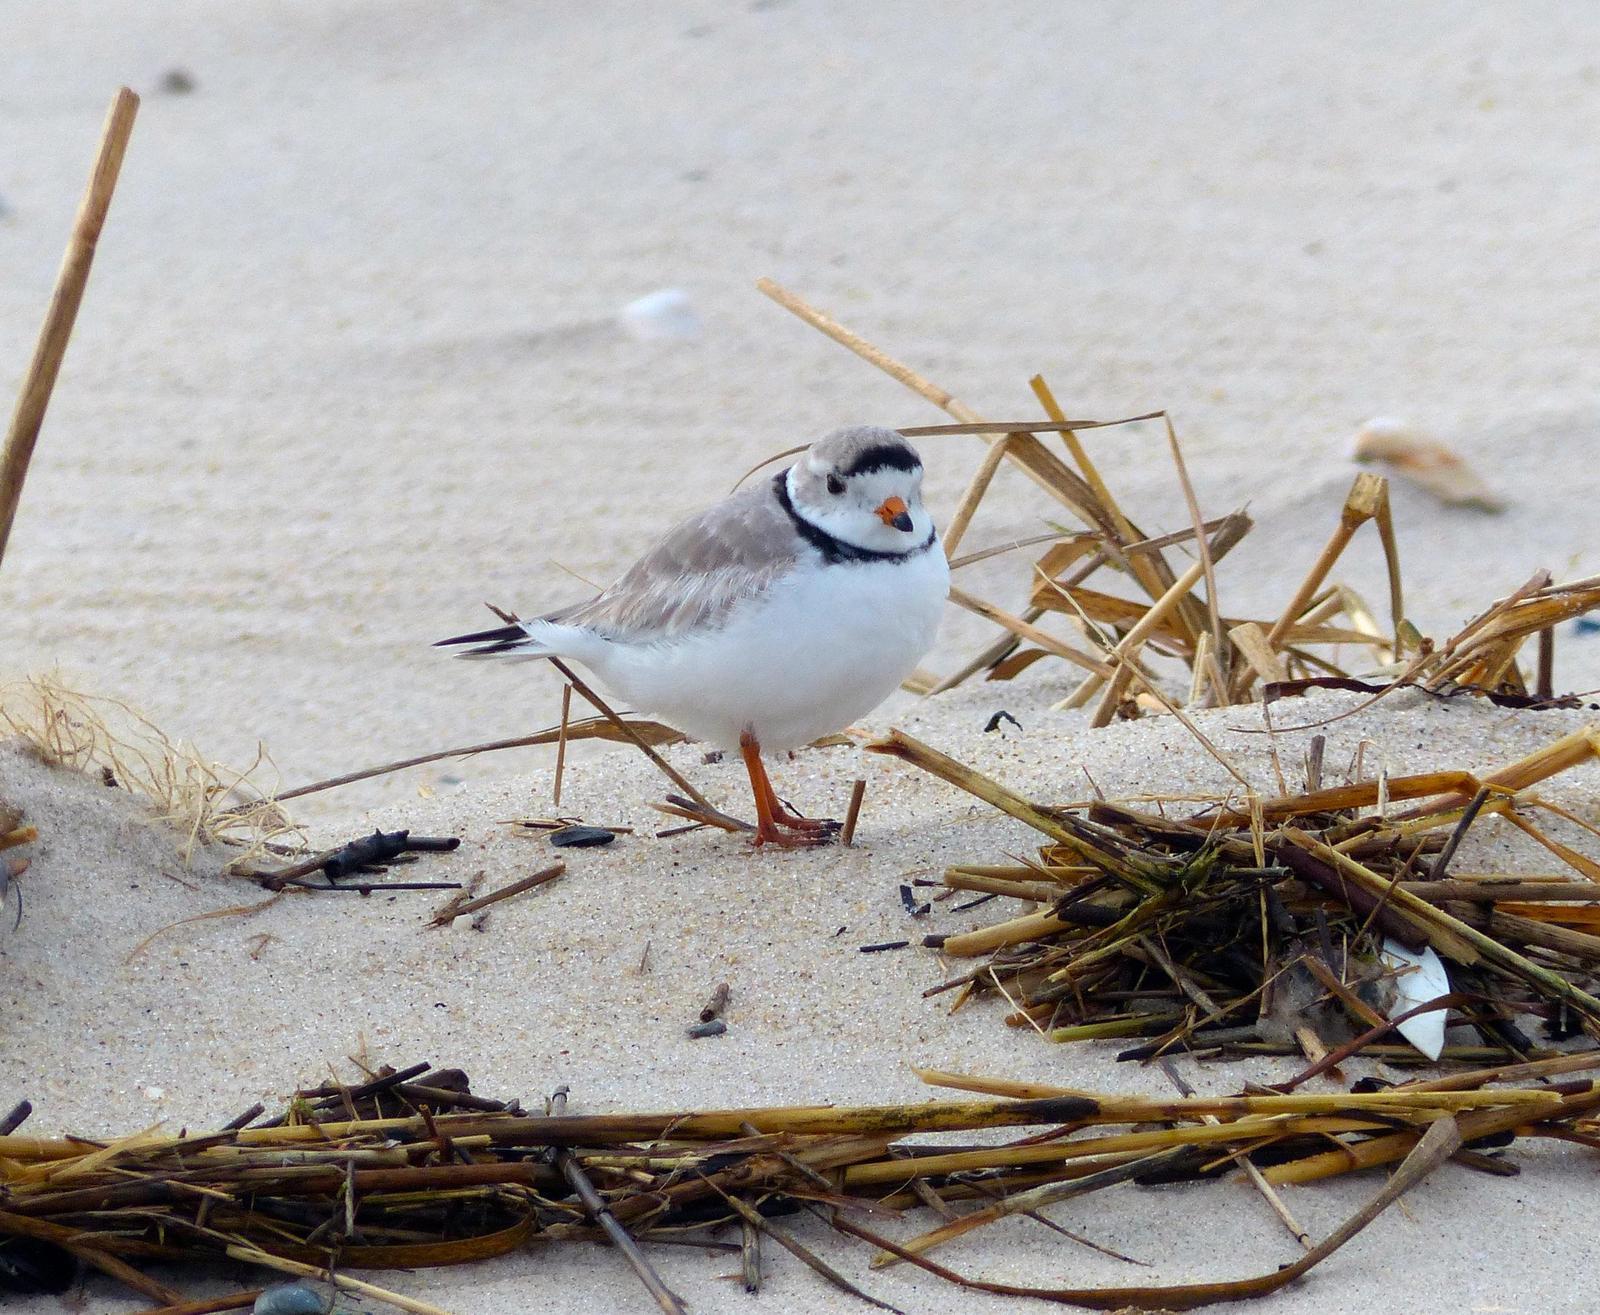 Piping Plover Photo by William Haluska